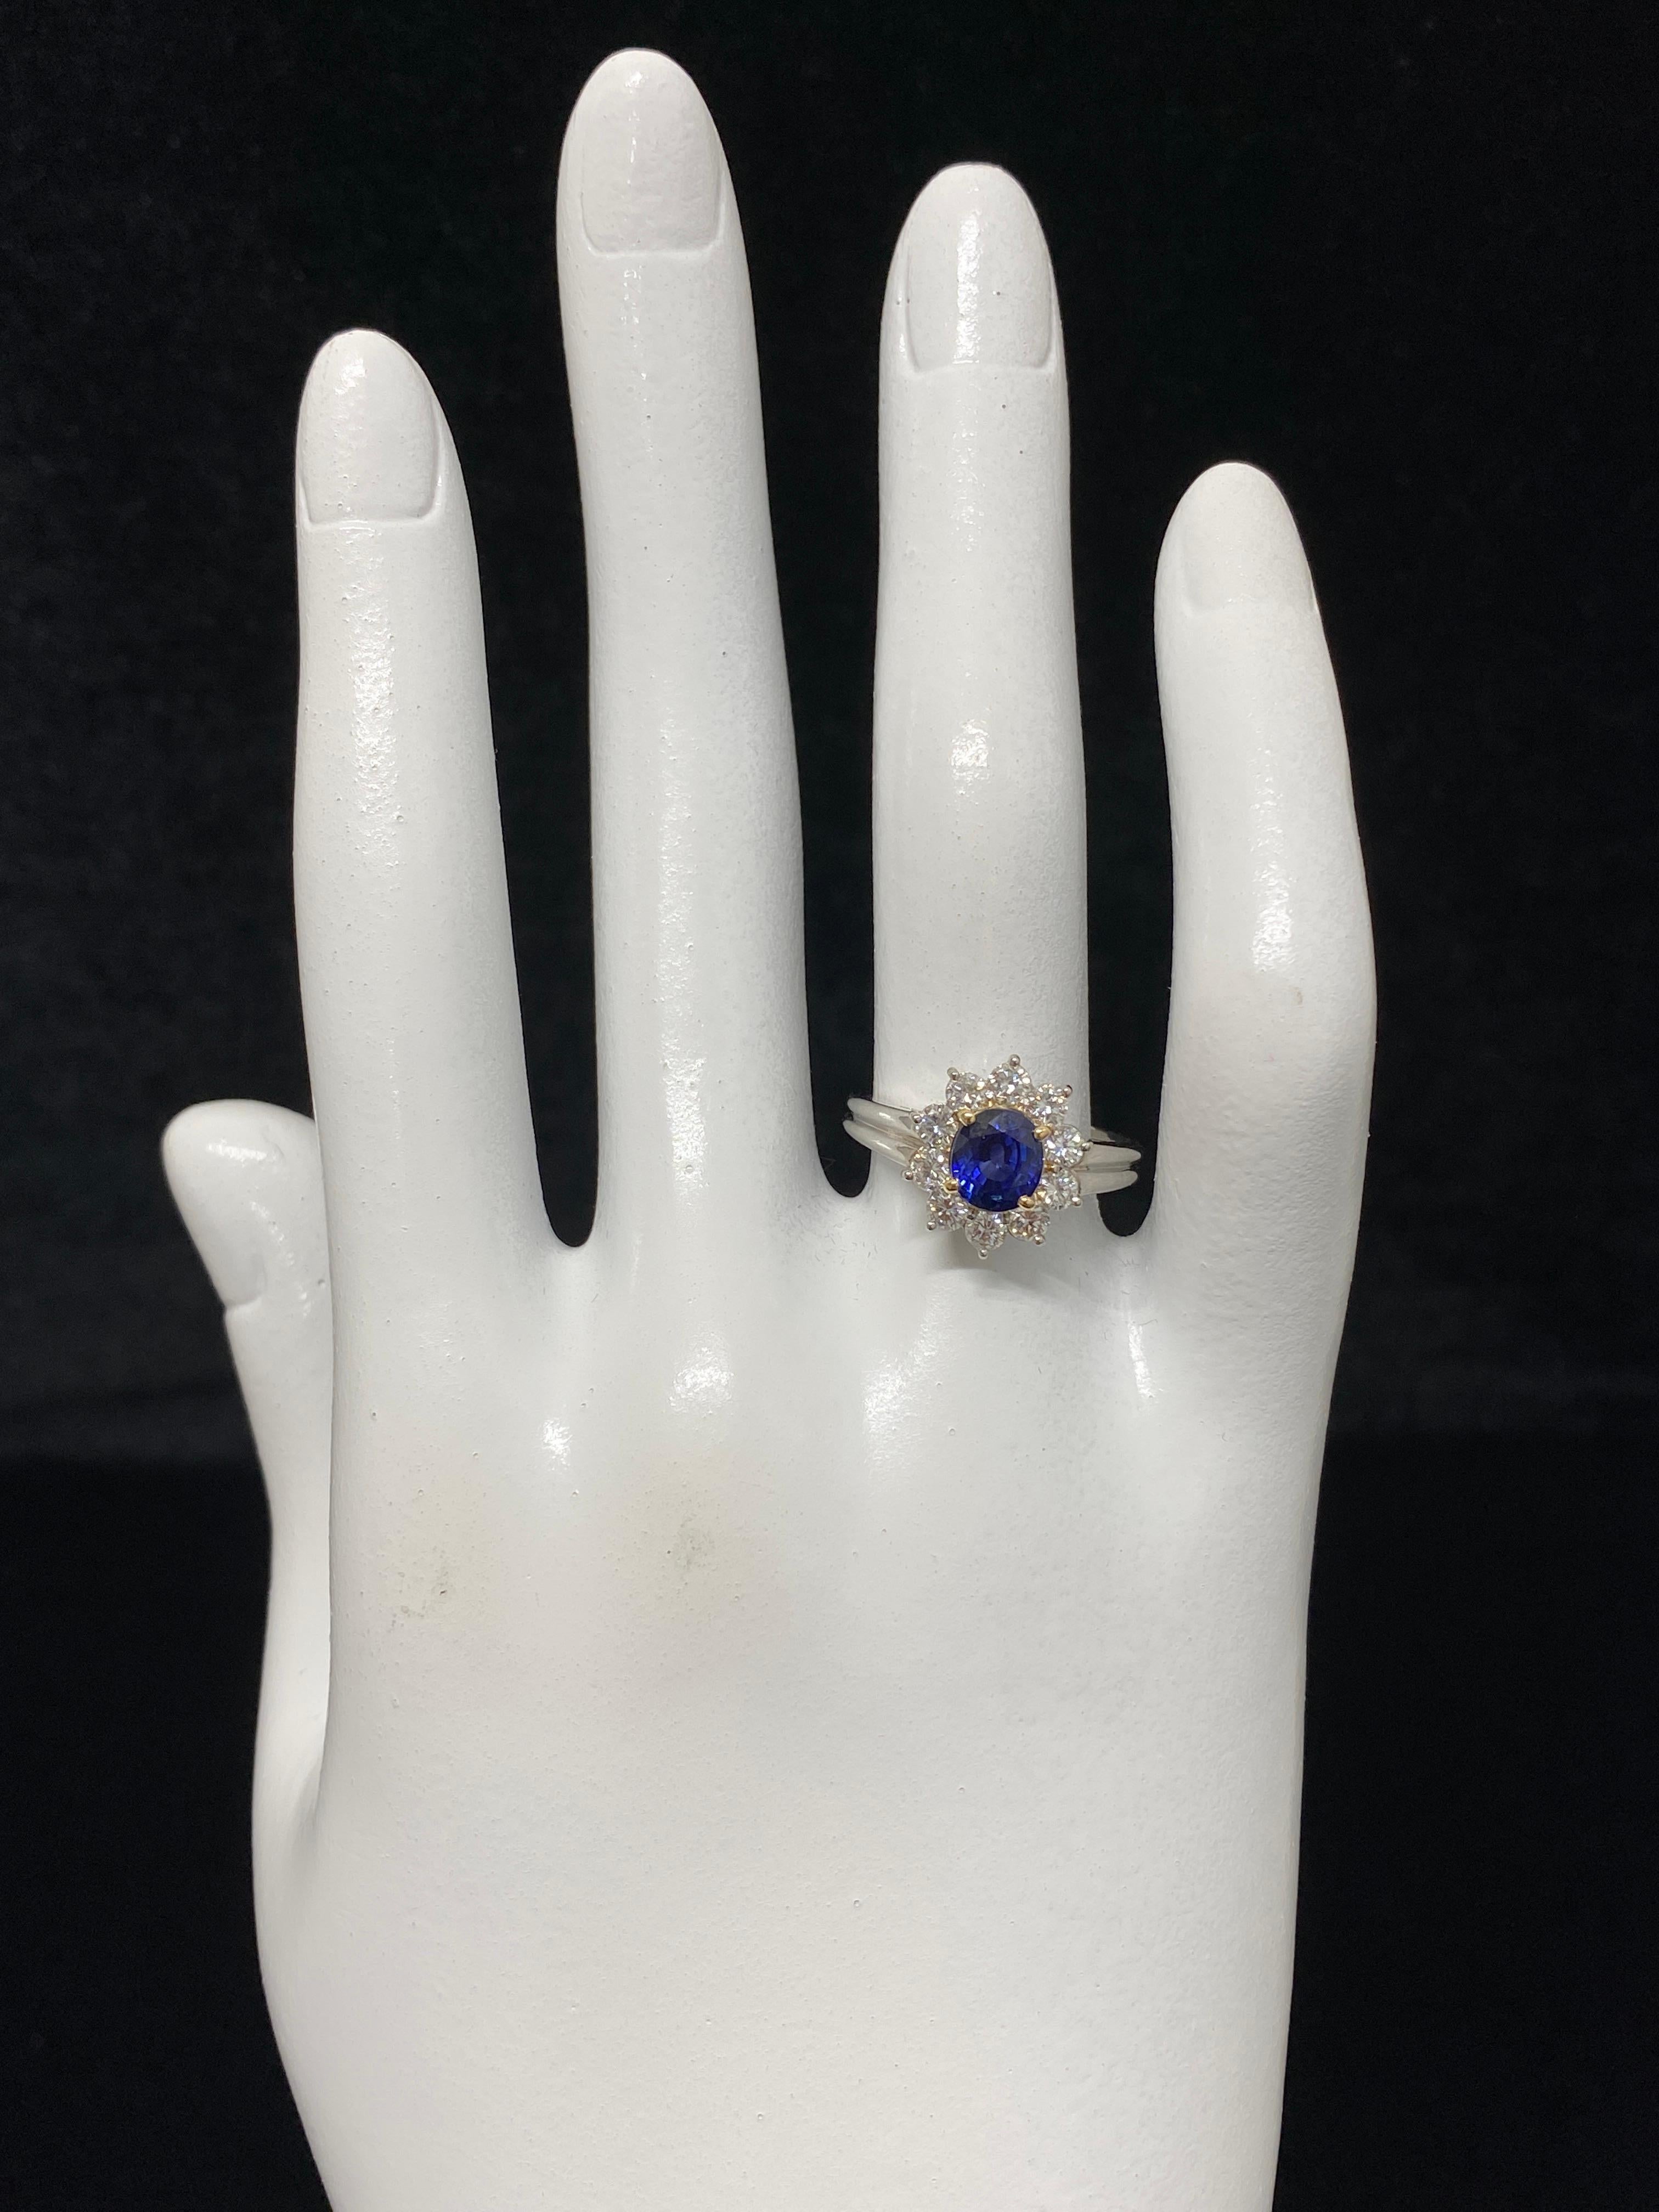 1.53 Carat Natural Blue Sapphire & Diamond Ring Set in Platinum and 18K Gold 1